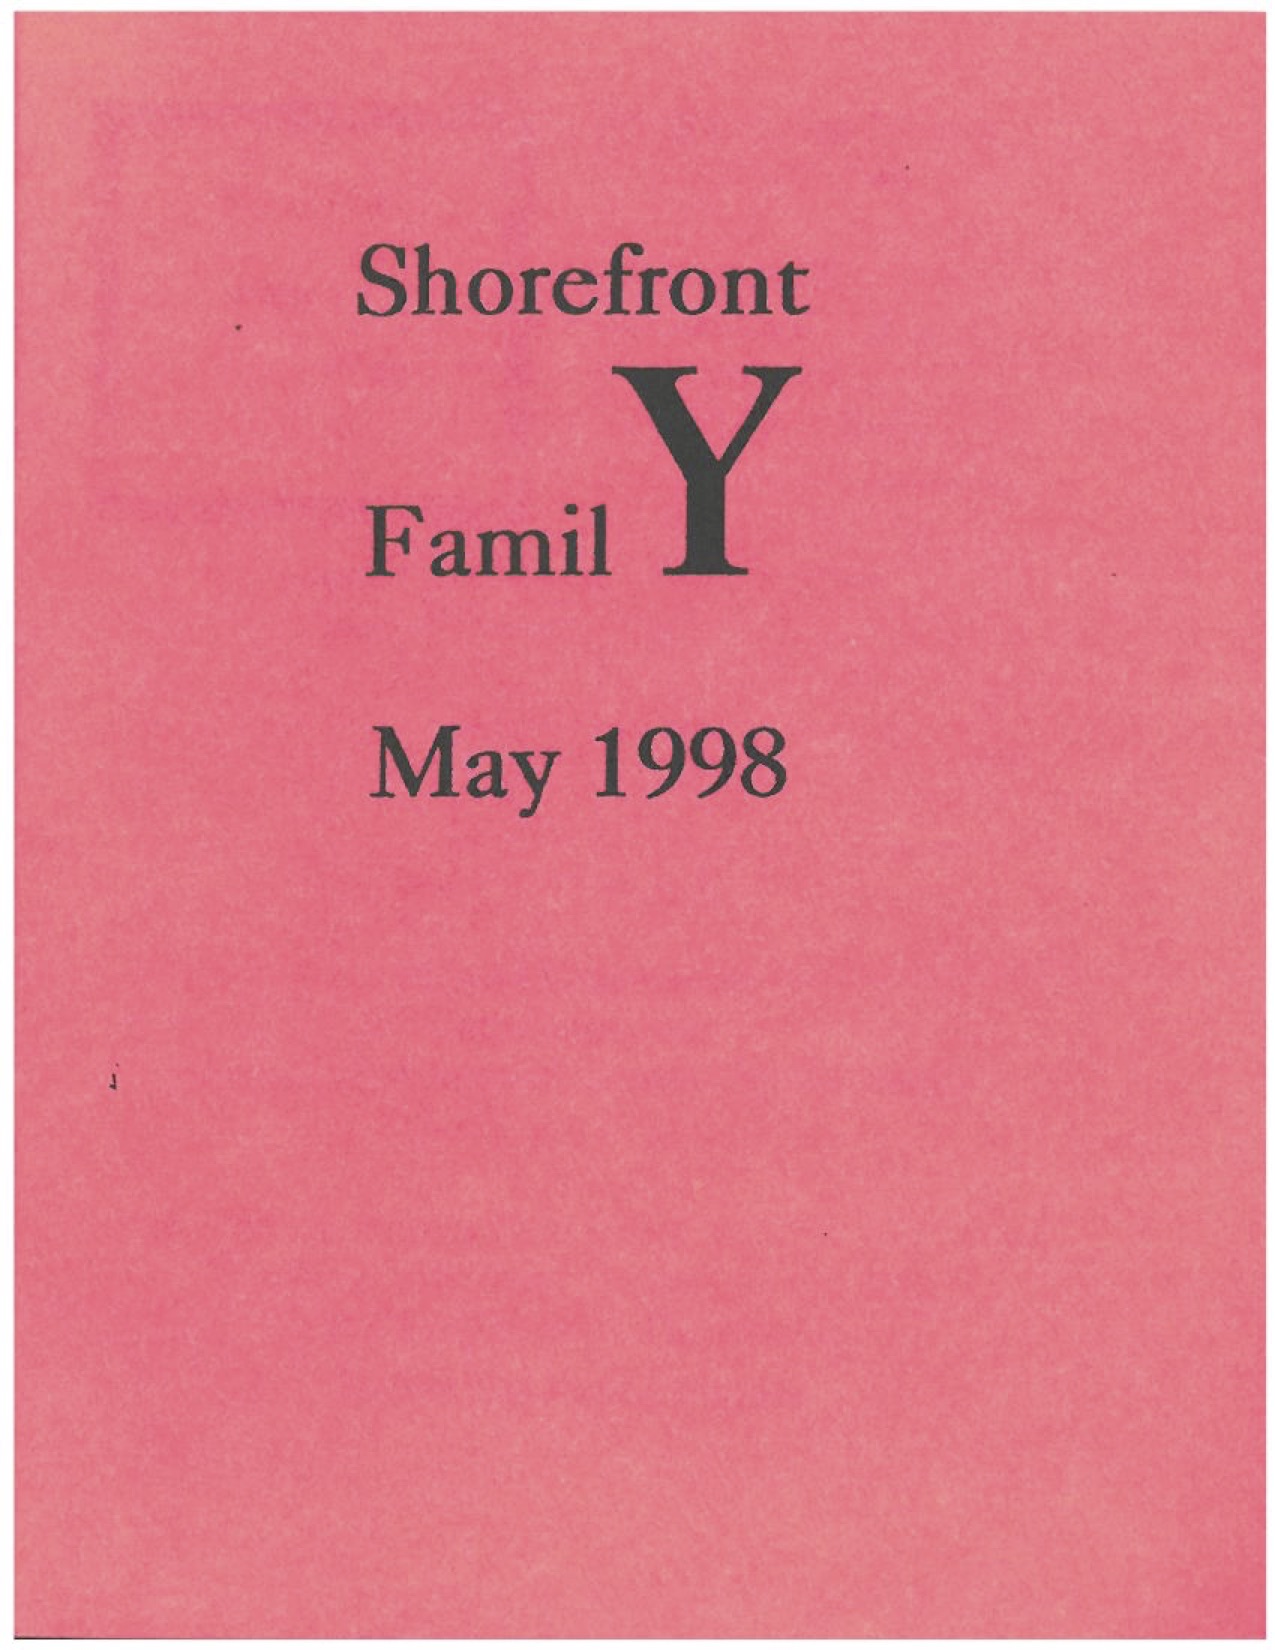 Shorefront Family Y